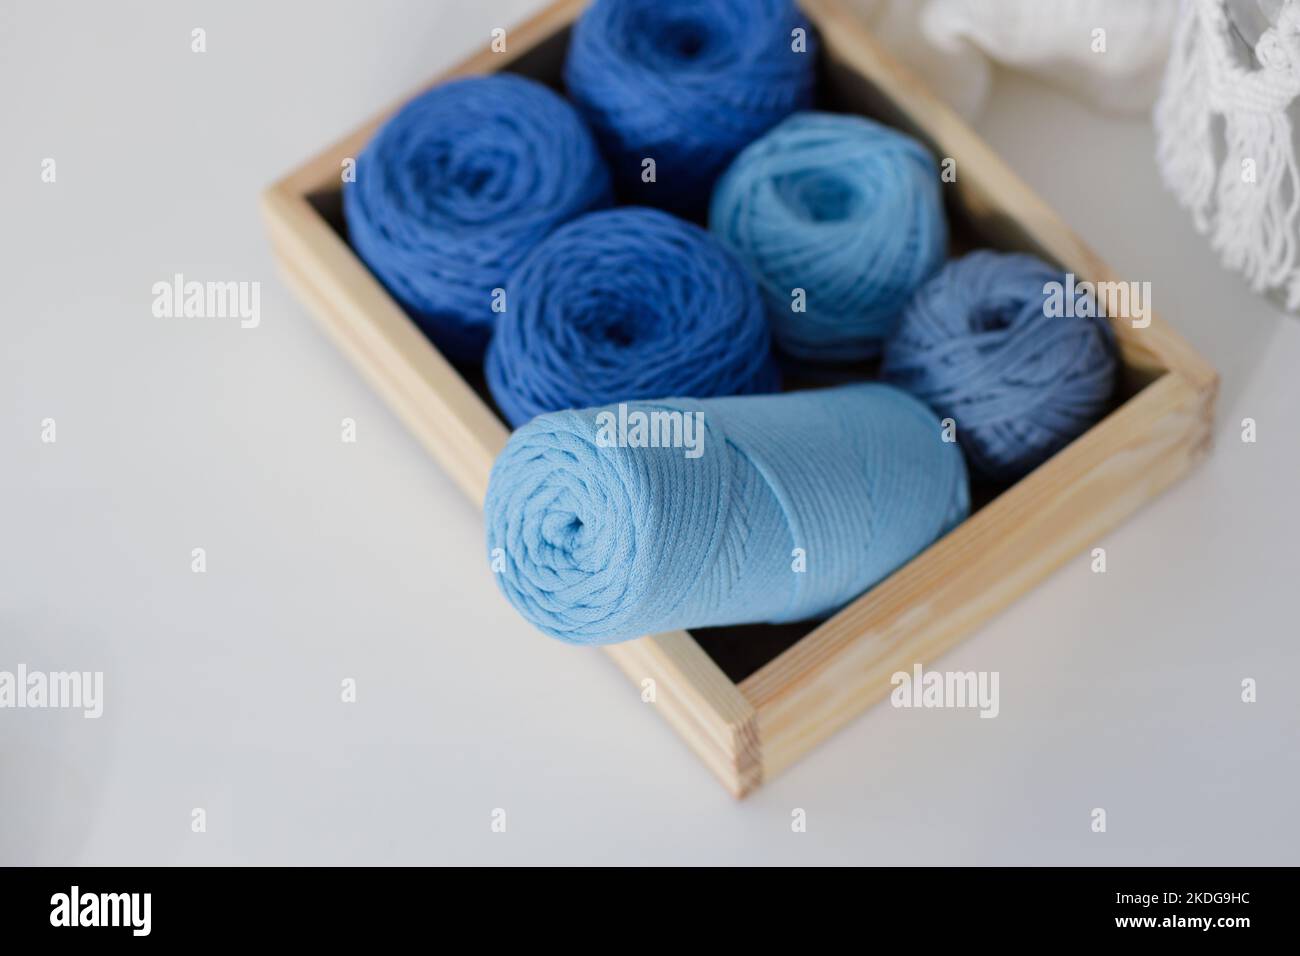 Balls of blue and light blue cotton macrame ropes in a wooden box on a white table Stock Photo